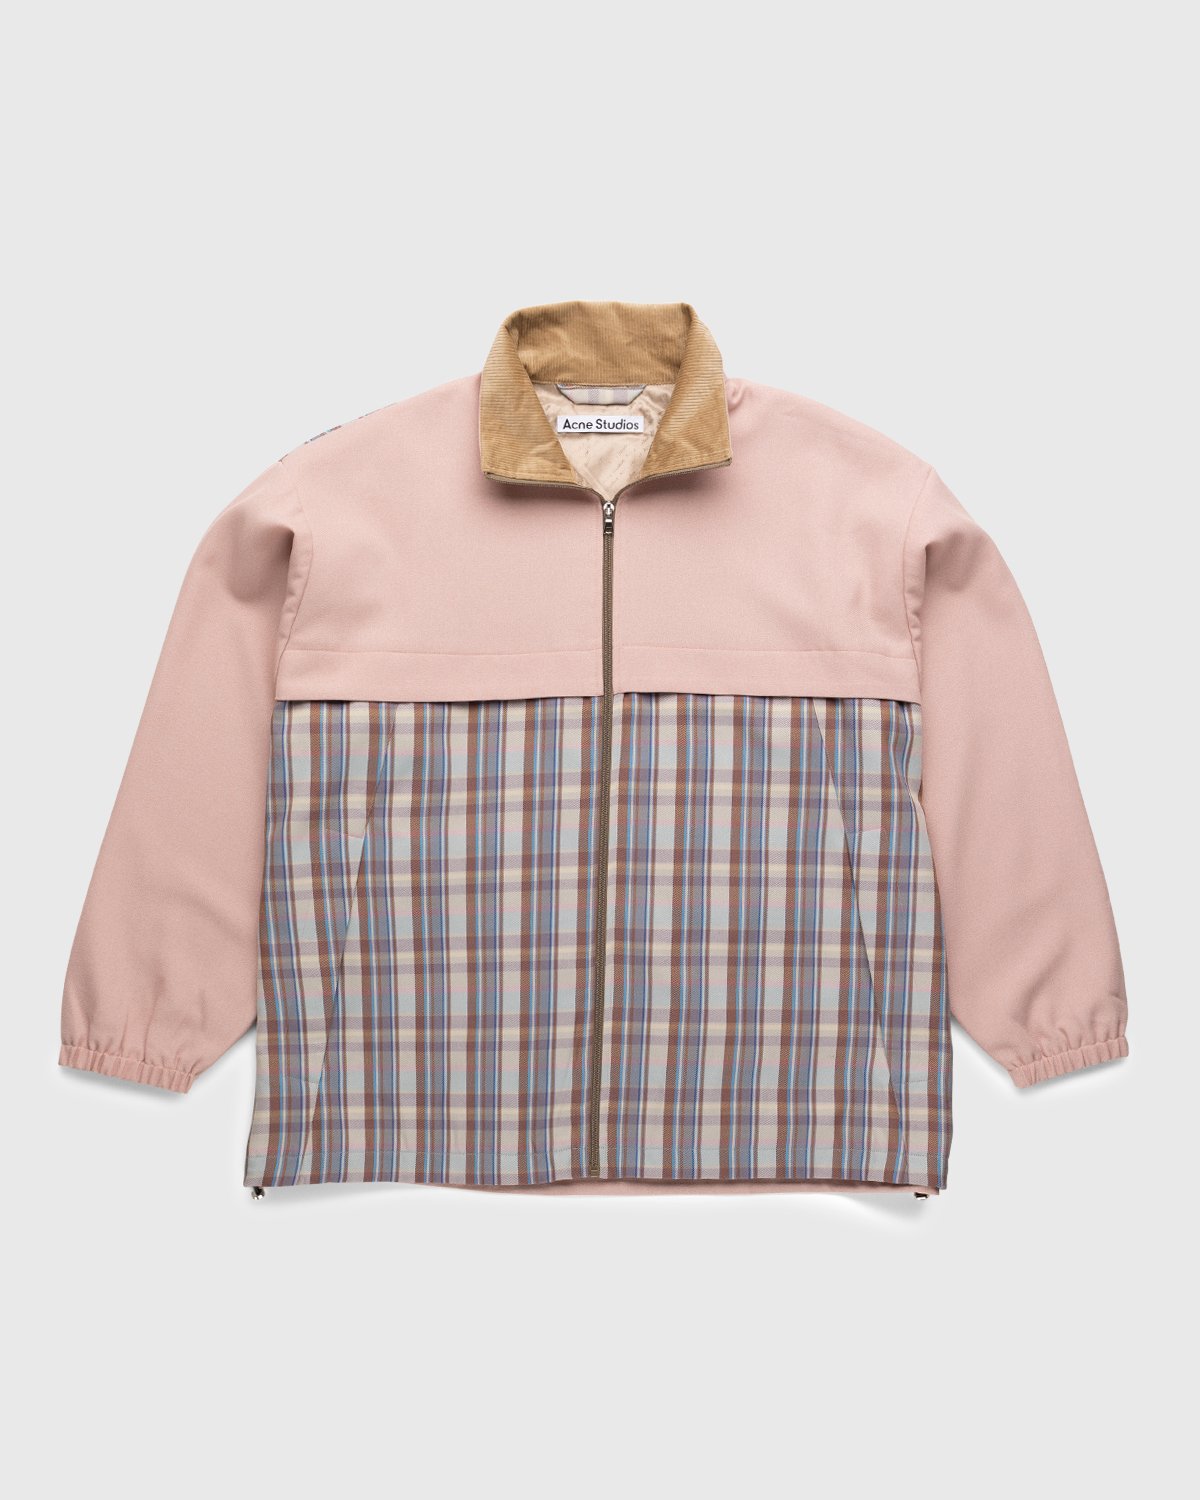 Acne Studios - Checked Twill Jacket Blossom Pink - Clothing - Pink - Image 1